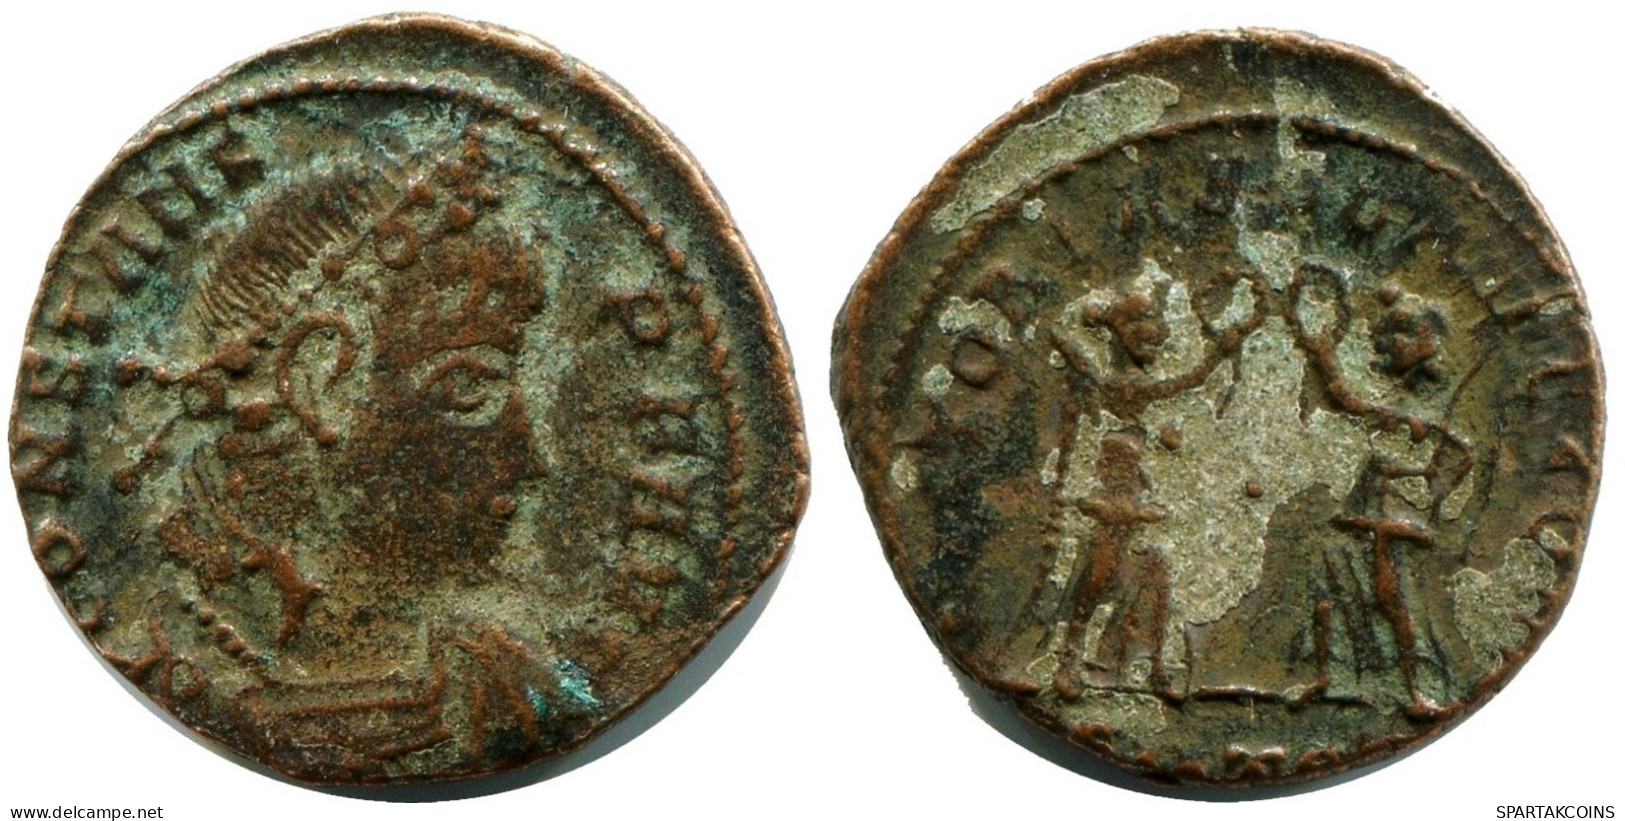 CONSTANS MINTED IN THESSALONICA FROM THE ROYAL ONTARIO MUSEUM #ANC11881.14.D.A - The Christian Empire (307 AD Tot 363 AD)